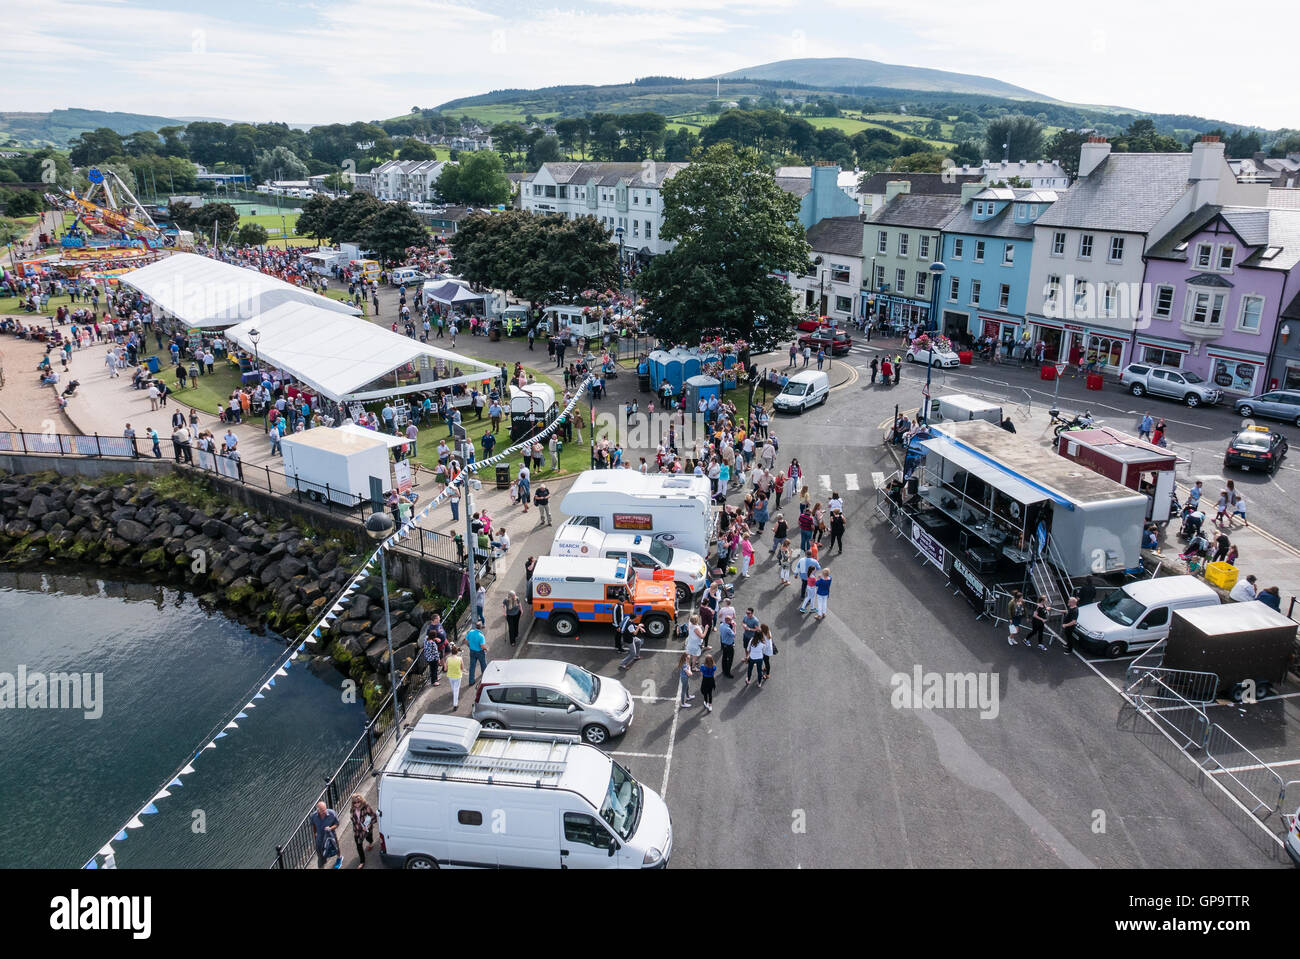 Crowds fill the streets of Ballycastle, during the annual Auld Lammas Fair, the oldest fair in the world. Stock Photo